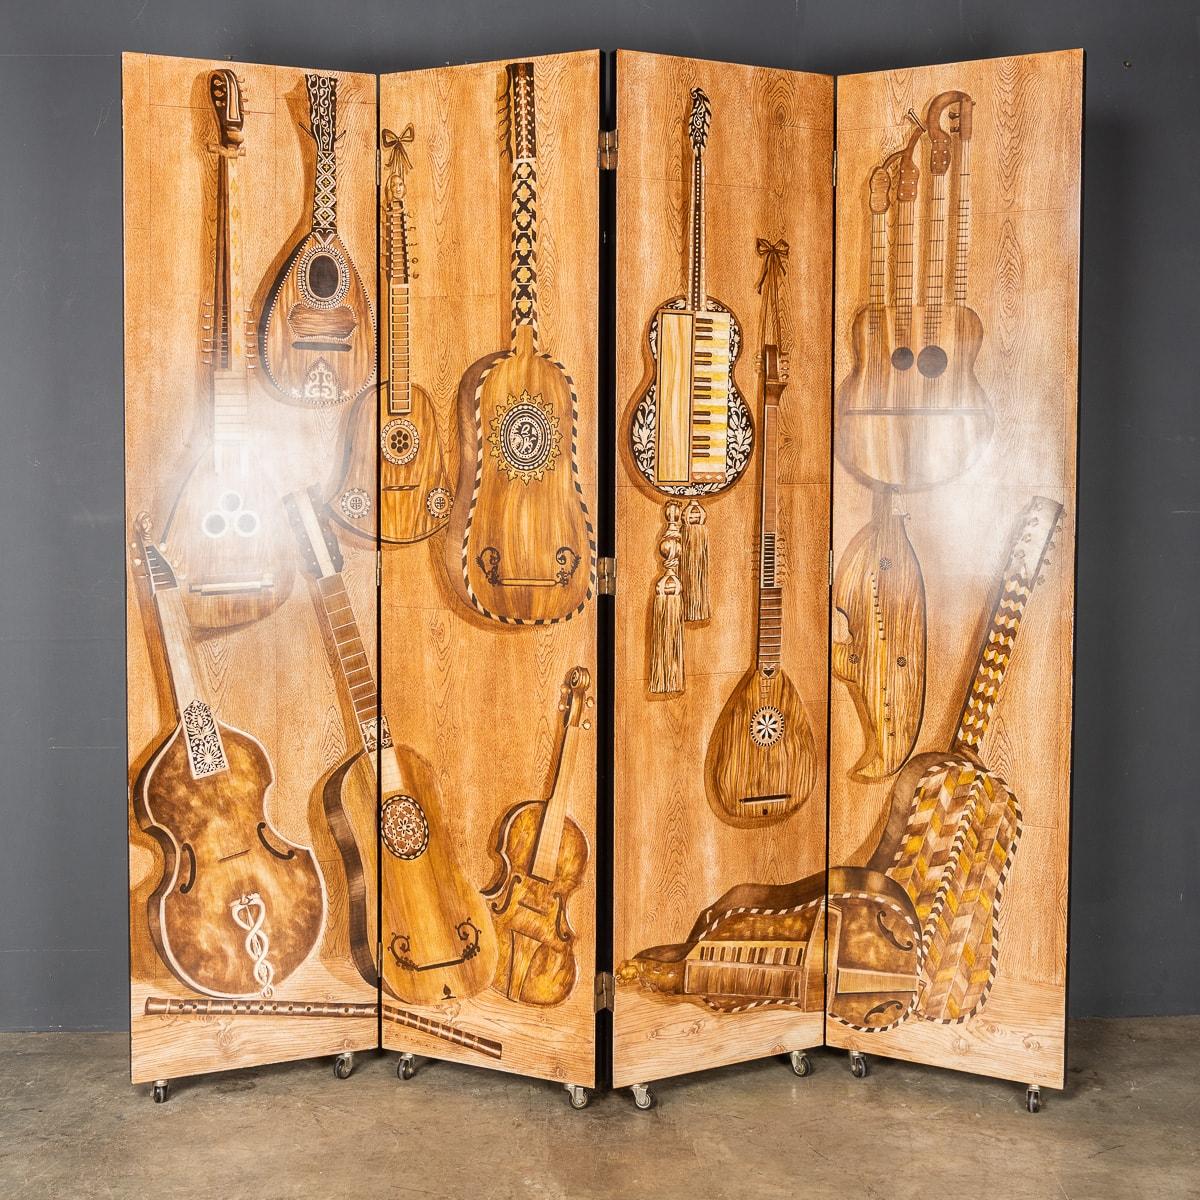 A very rare musical folding screen by Fornasetti Studios made in Italy towards the latter end of the 20th century. Special edition of the famous strumenti musicali four fold screen by Fornesetti, first produced in the 1954, the screen with serial